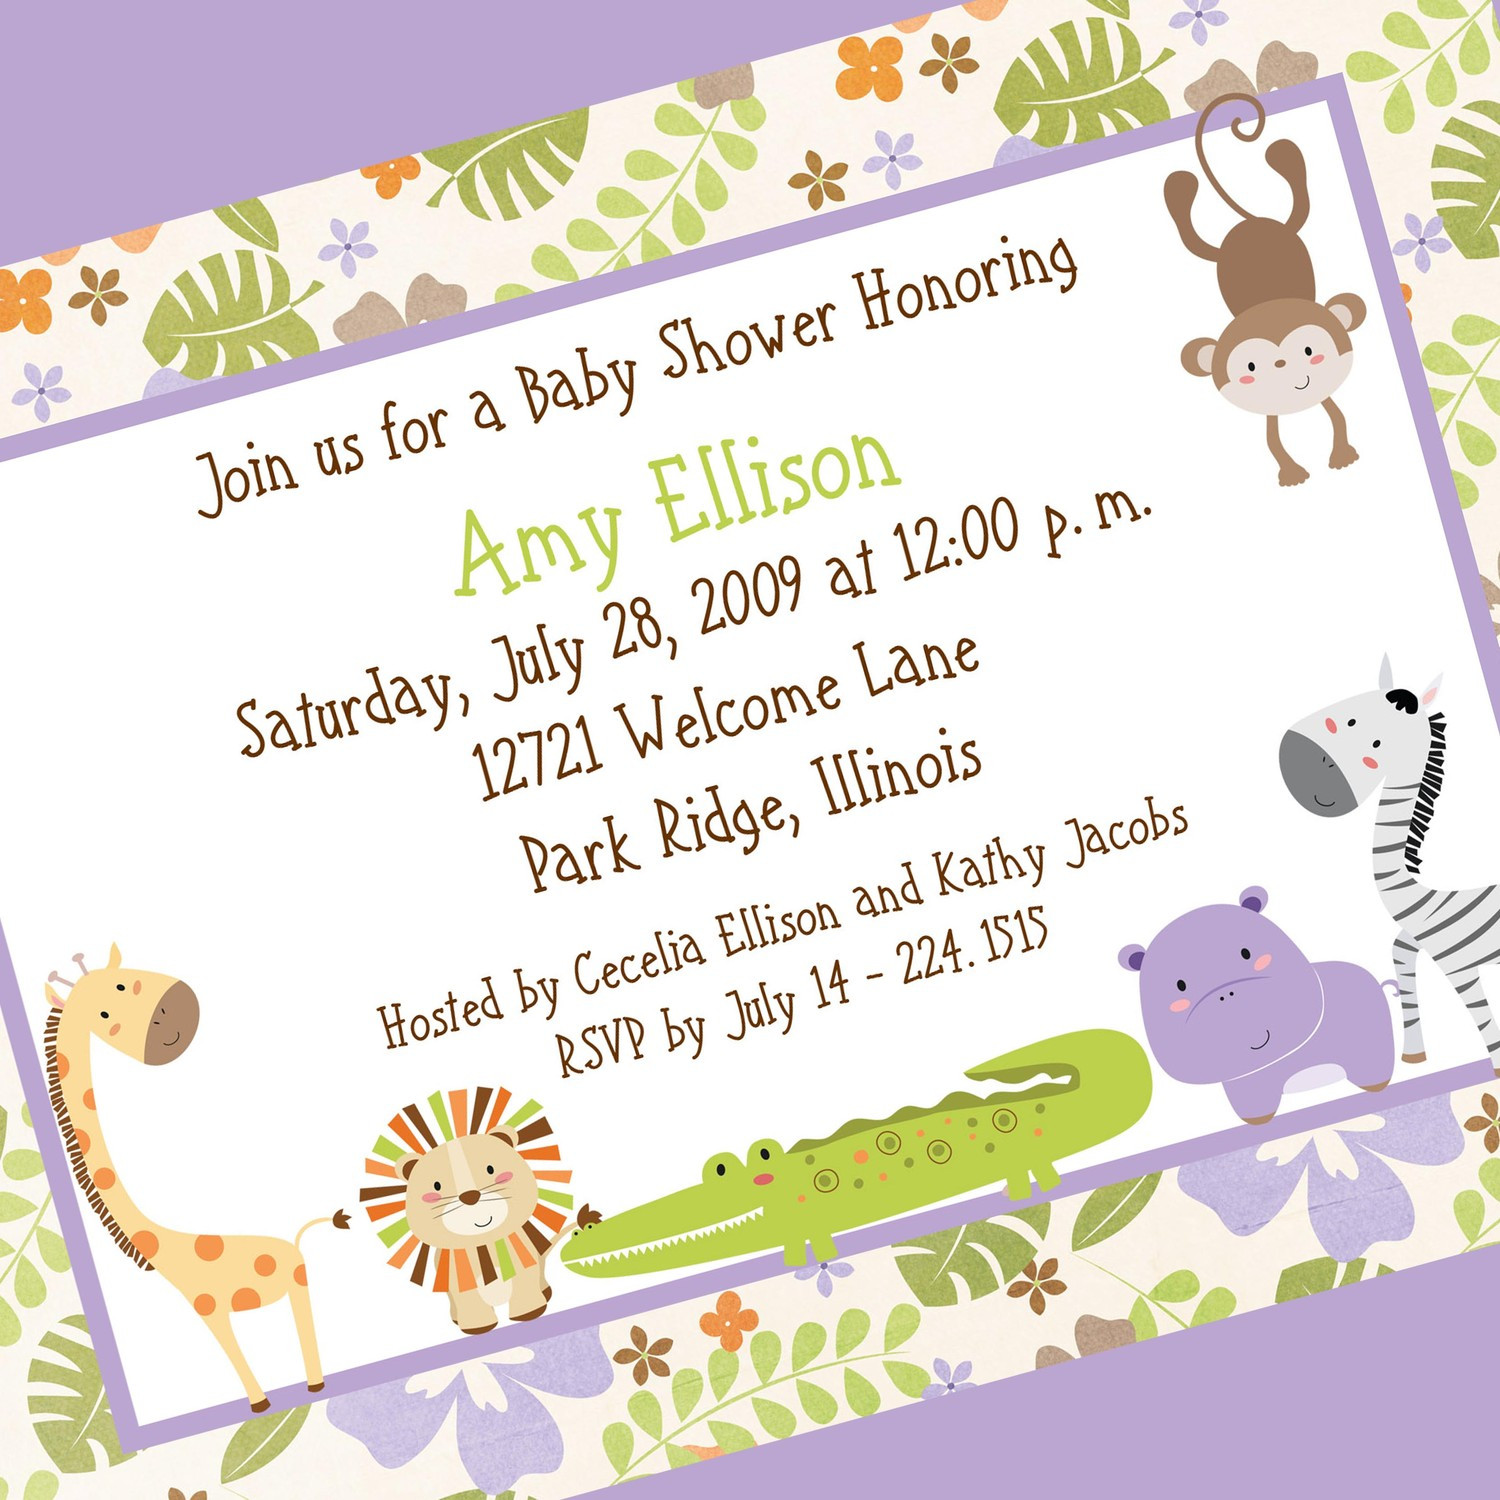 Baby Shower Invitation Quotes
 Homemade Baby Shower Gifts Ideas unique ts to children